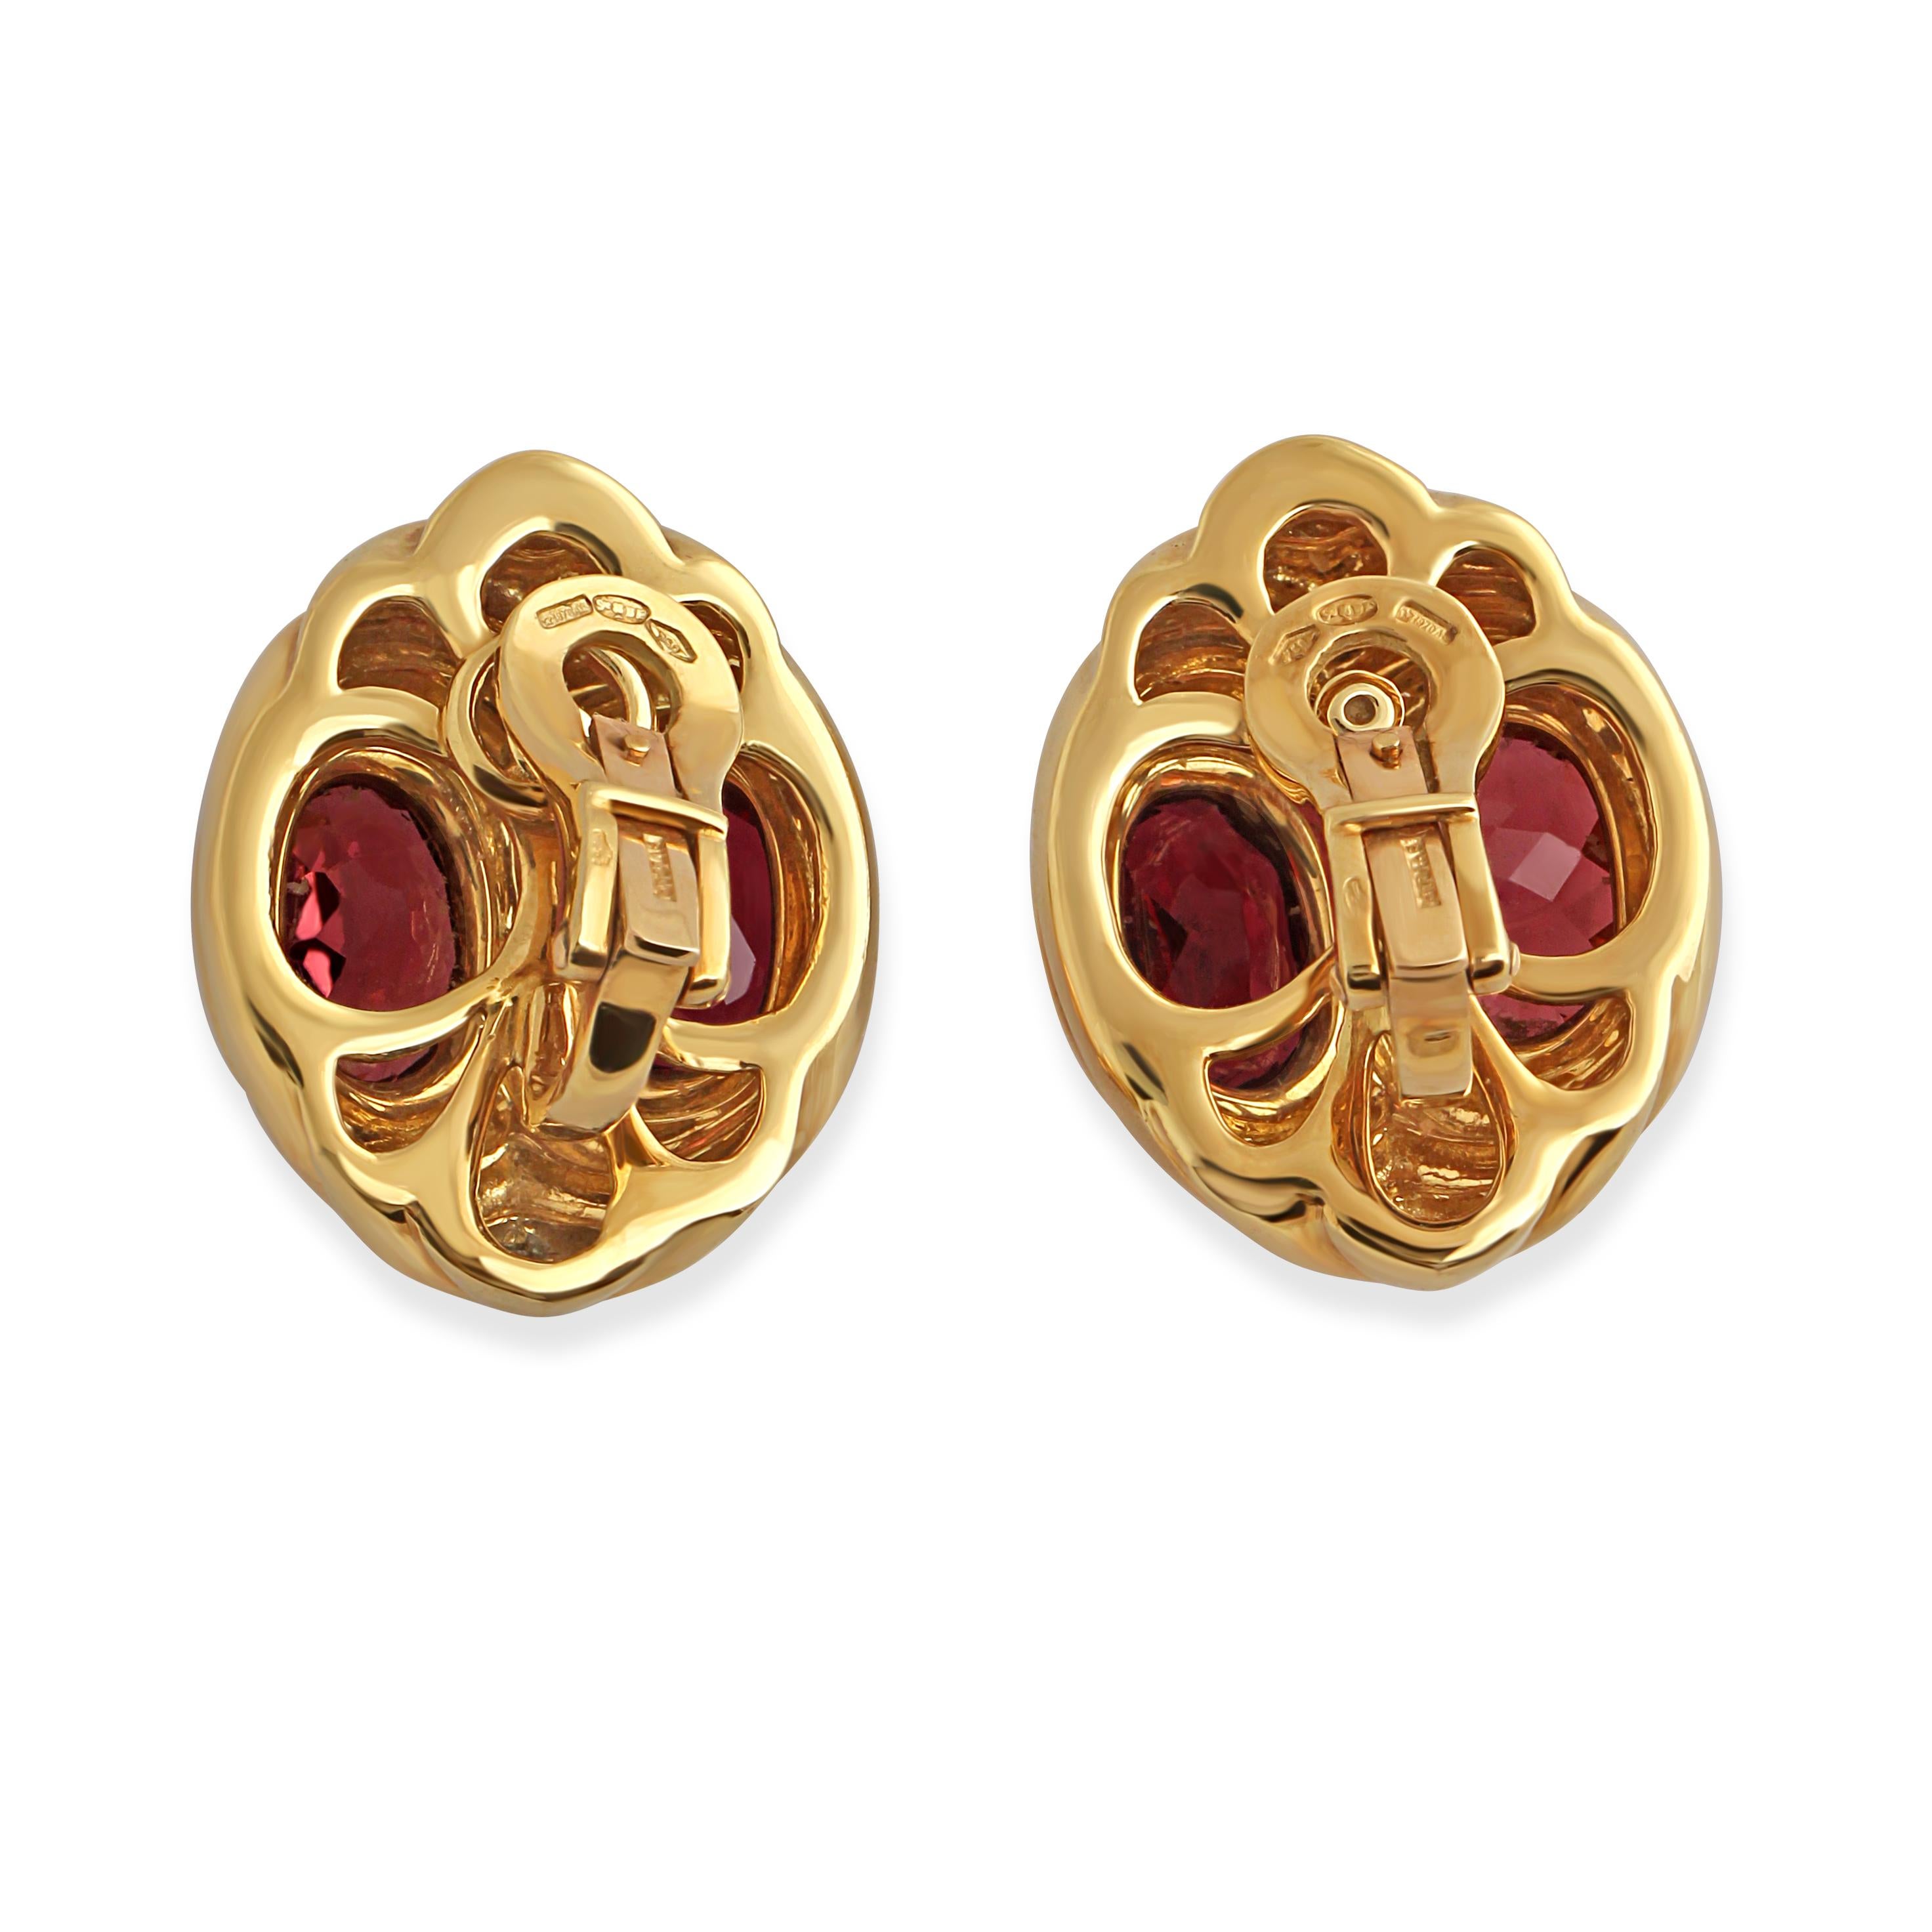 A pair of 18k gold earrings by Bulgari set with oval cut pink tourmalines. Weight = 26.10gr.
Length = 2.5cm

